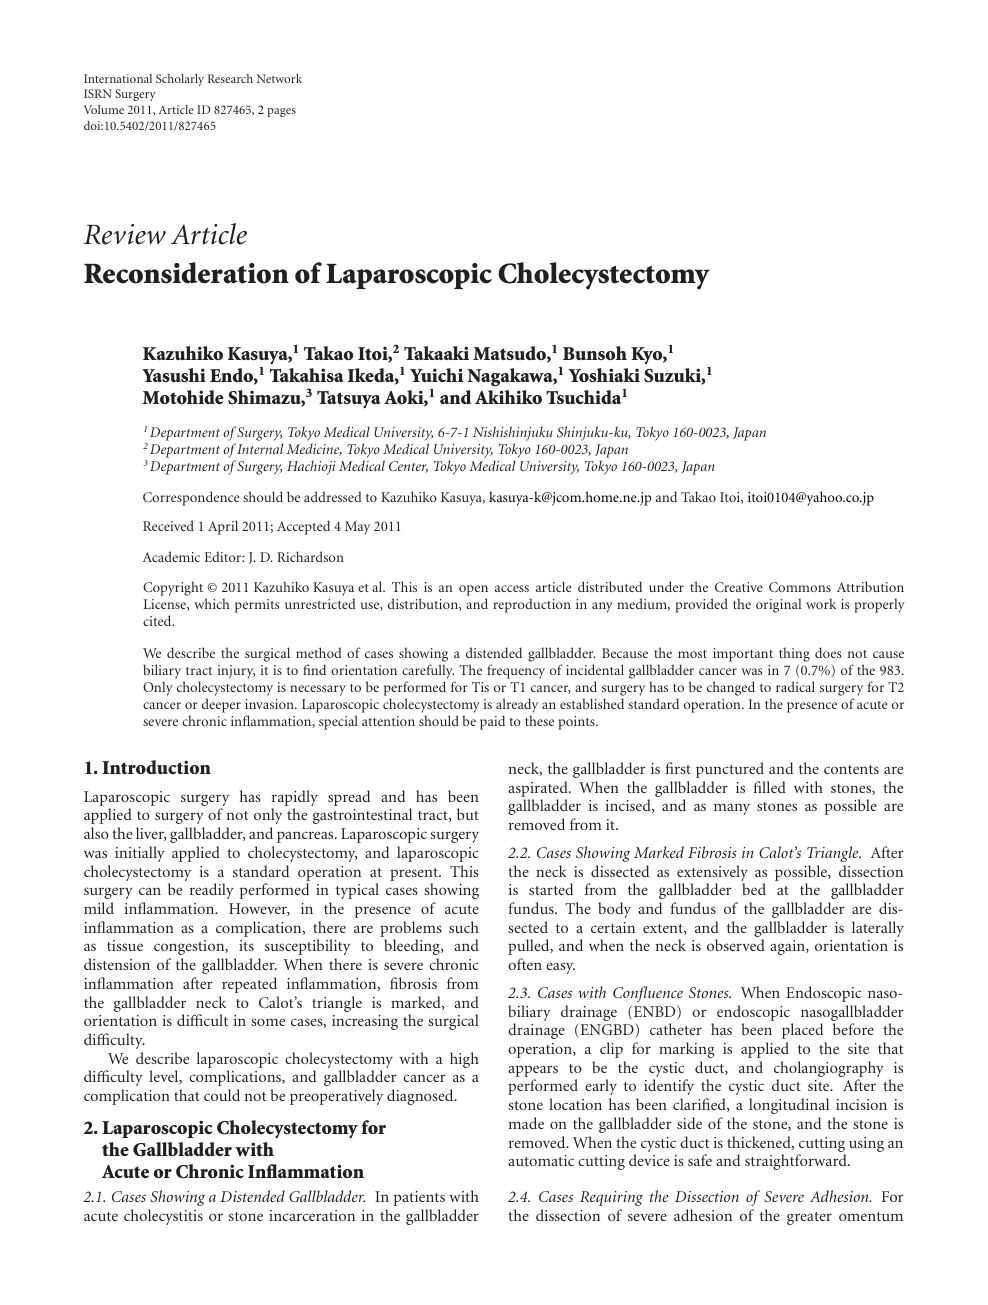 Reconsideration Of Laparoscopic Cholecystectomy Topic Of Research Paper In Clinical Medicine Download Scholarly Article Pdf And Read For Free On Cyberleninka Open Science Hub